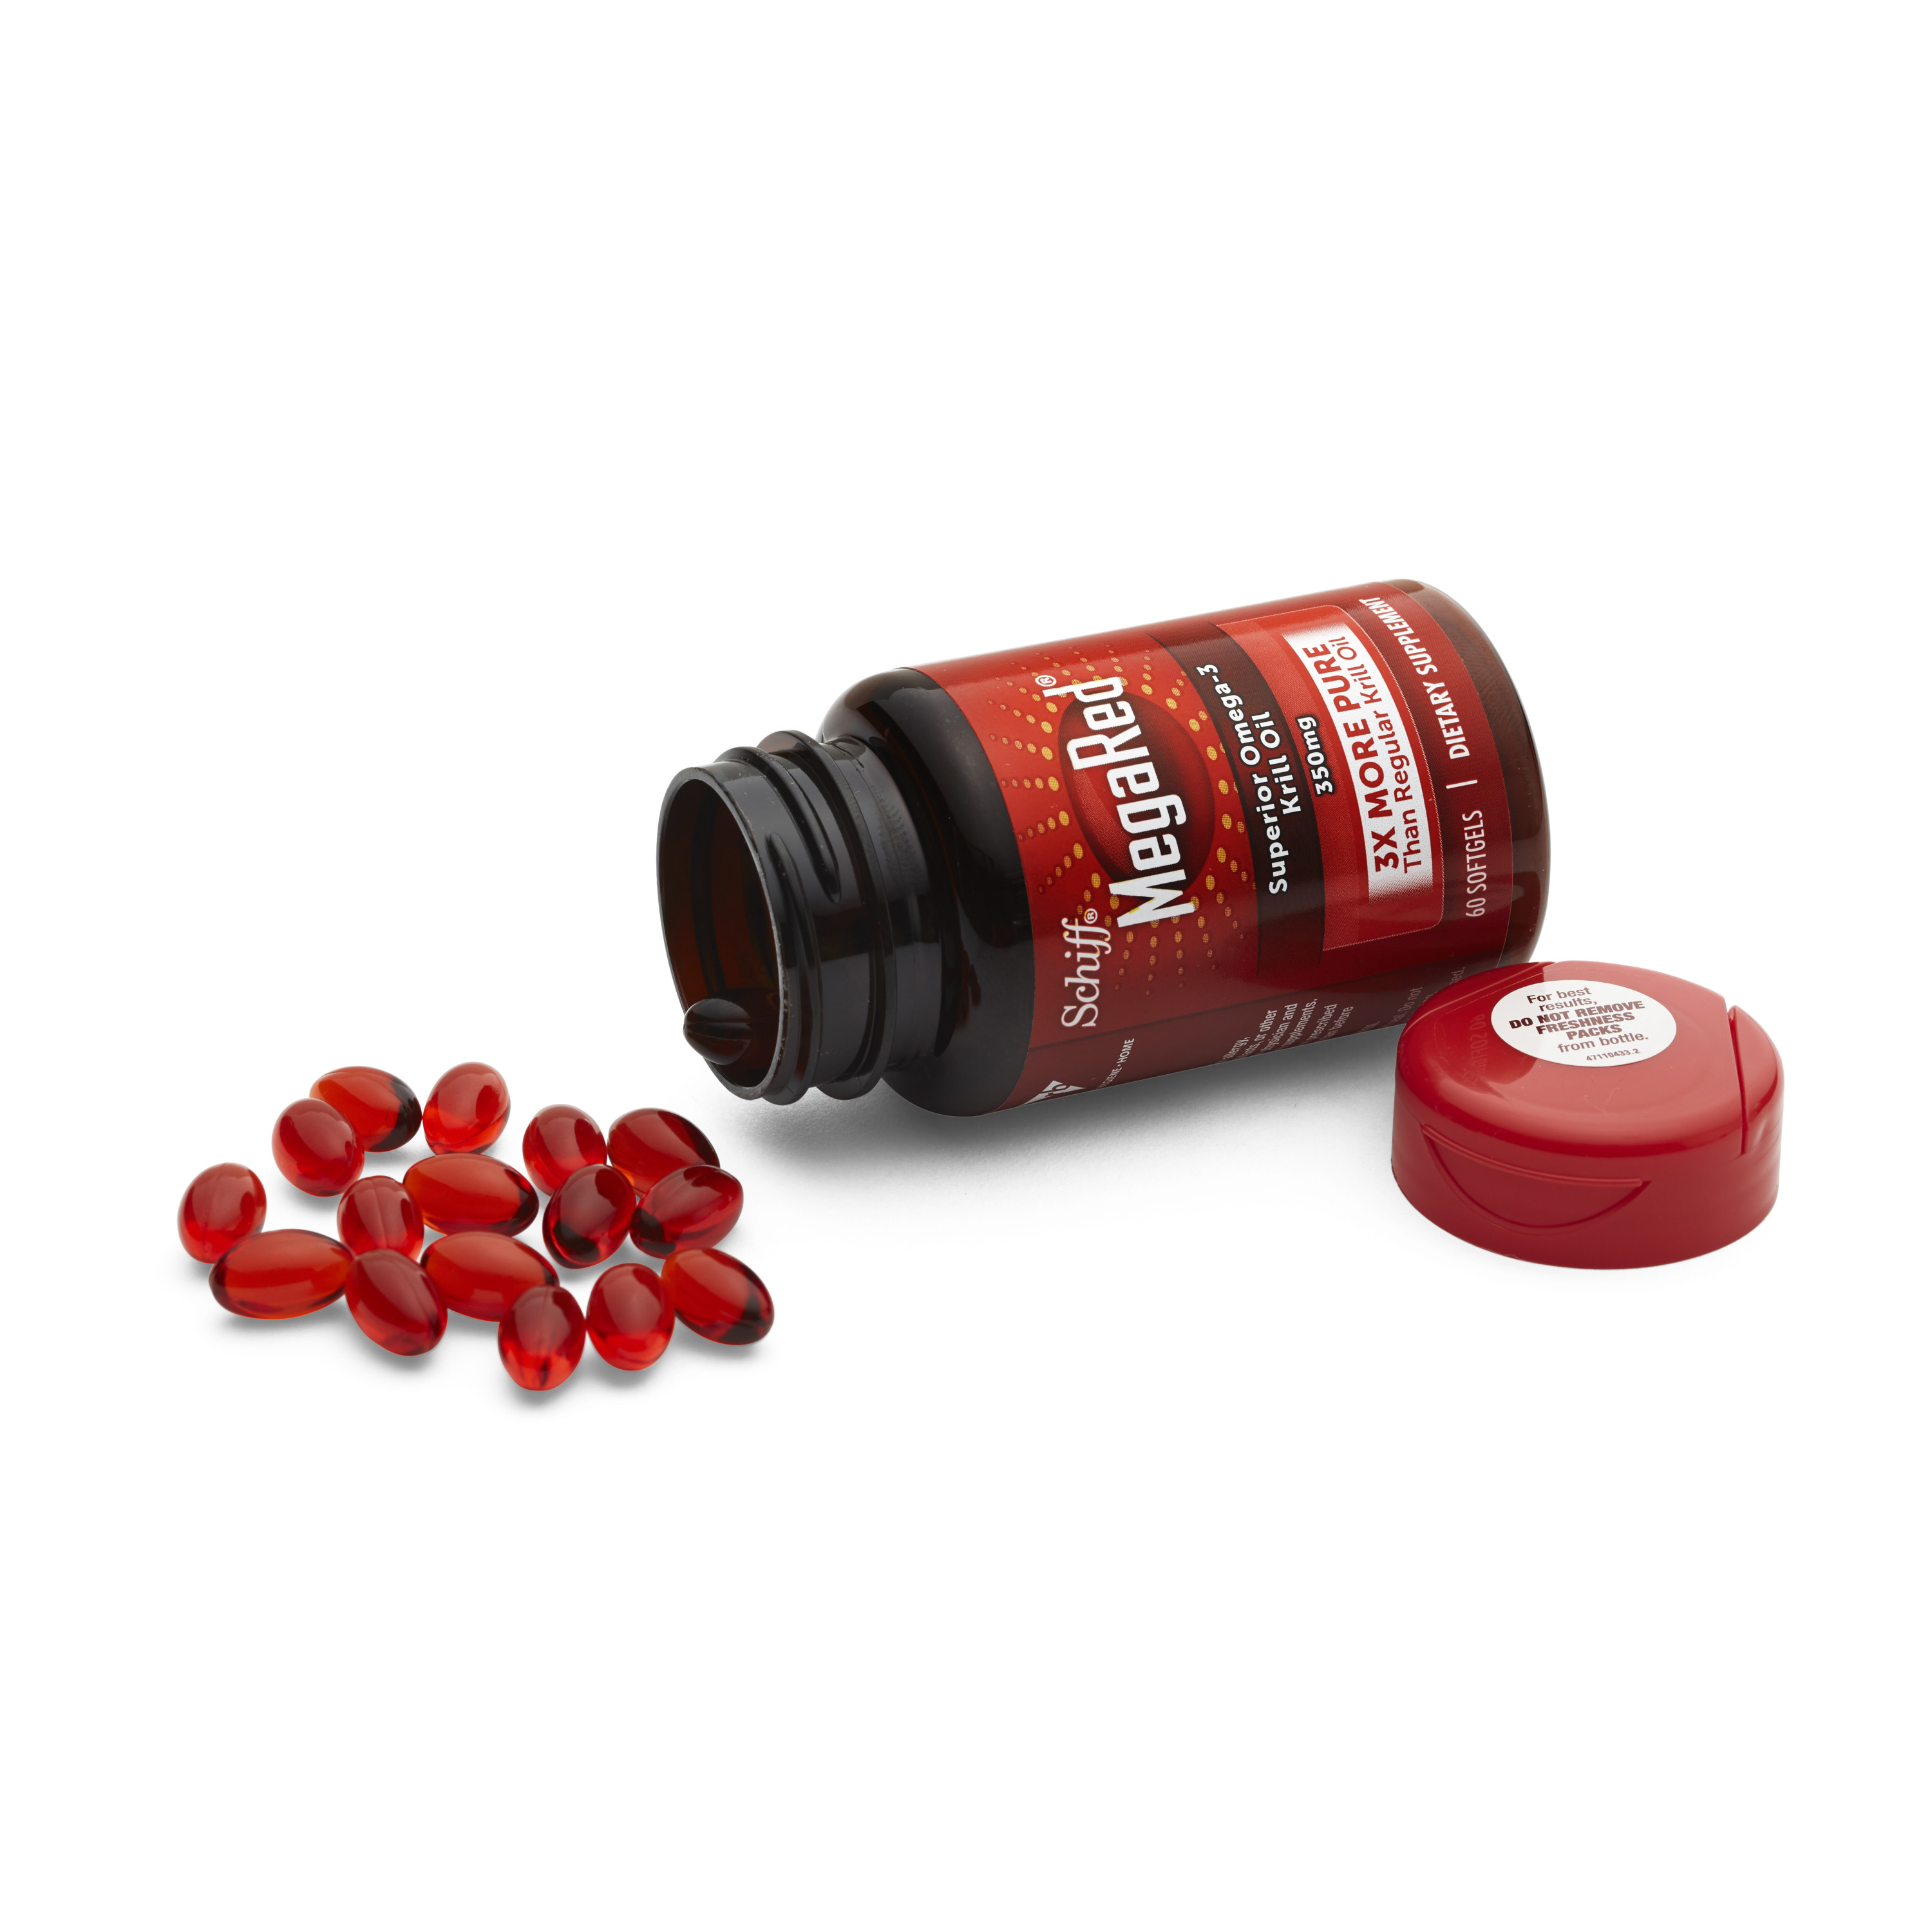 MegaRed 350mg Superior Omega-3s Krill Oil, 60 Softgels - image 10 of 14